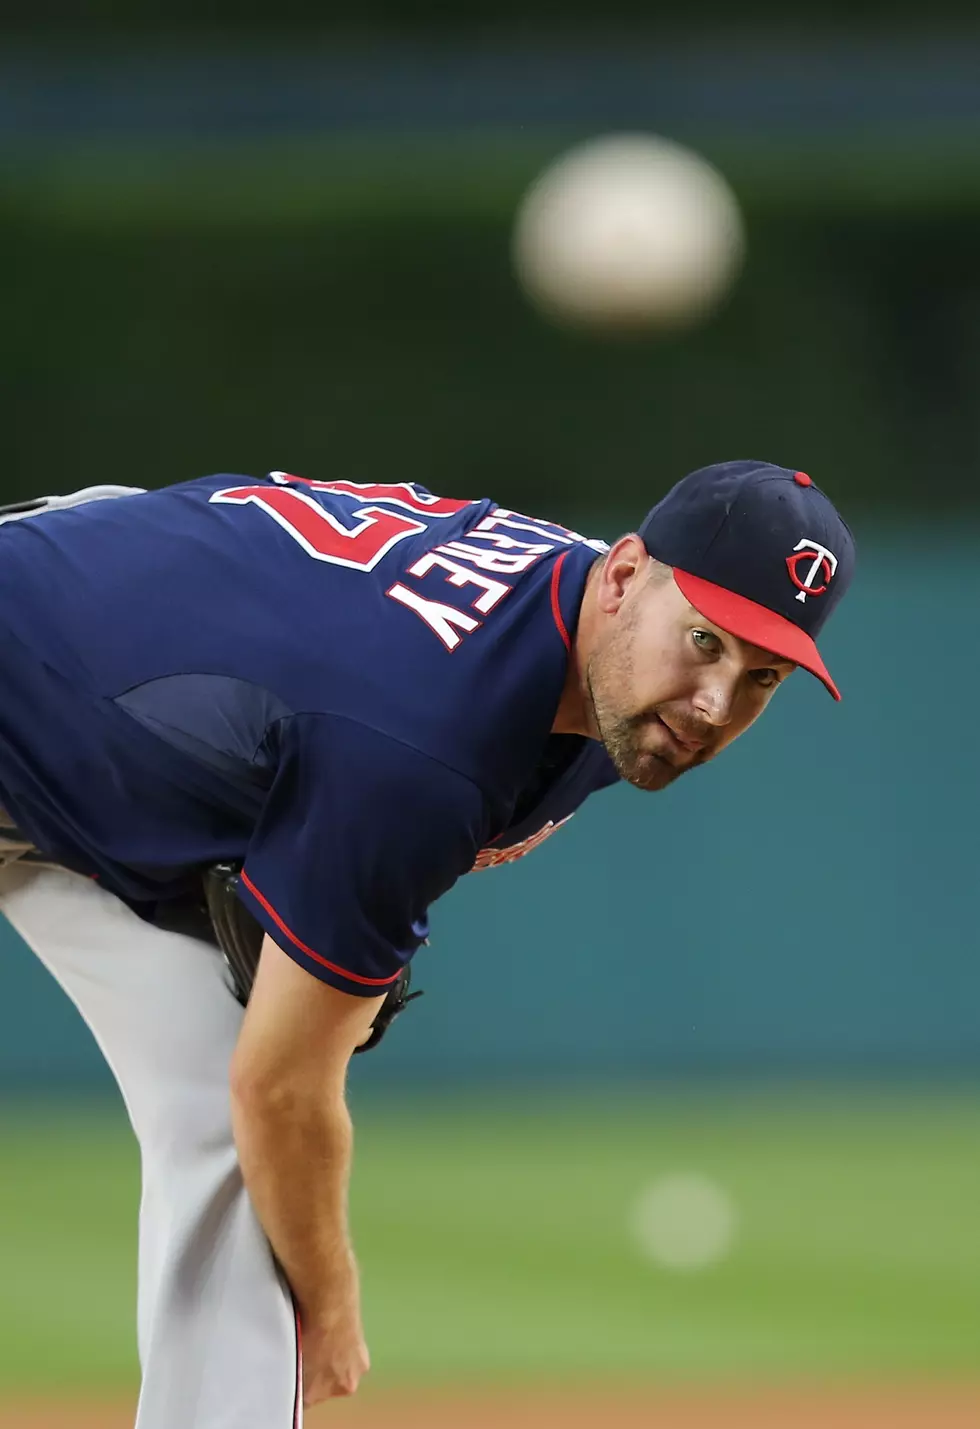 Tigers to Sign Mike Pelfrey